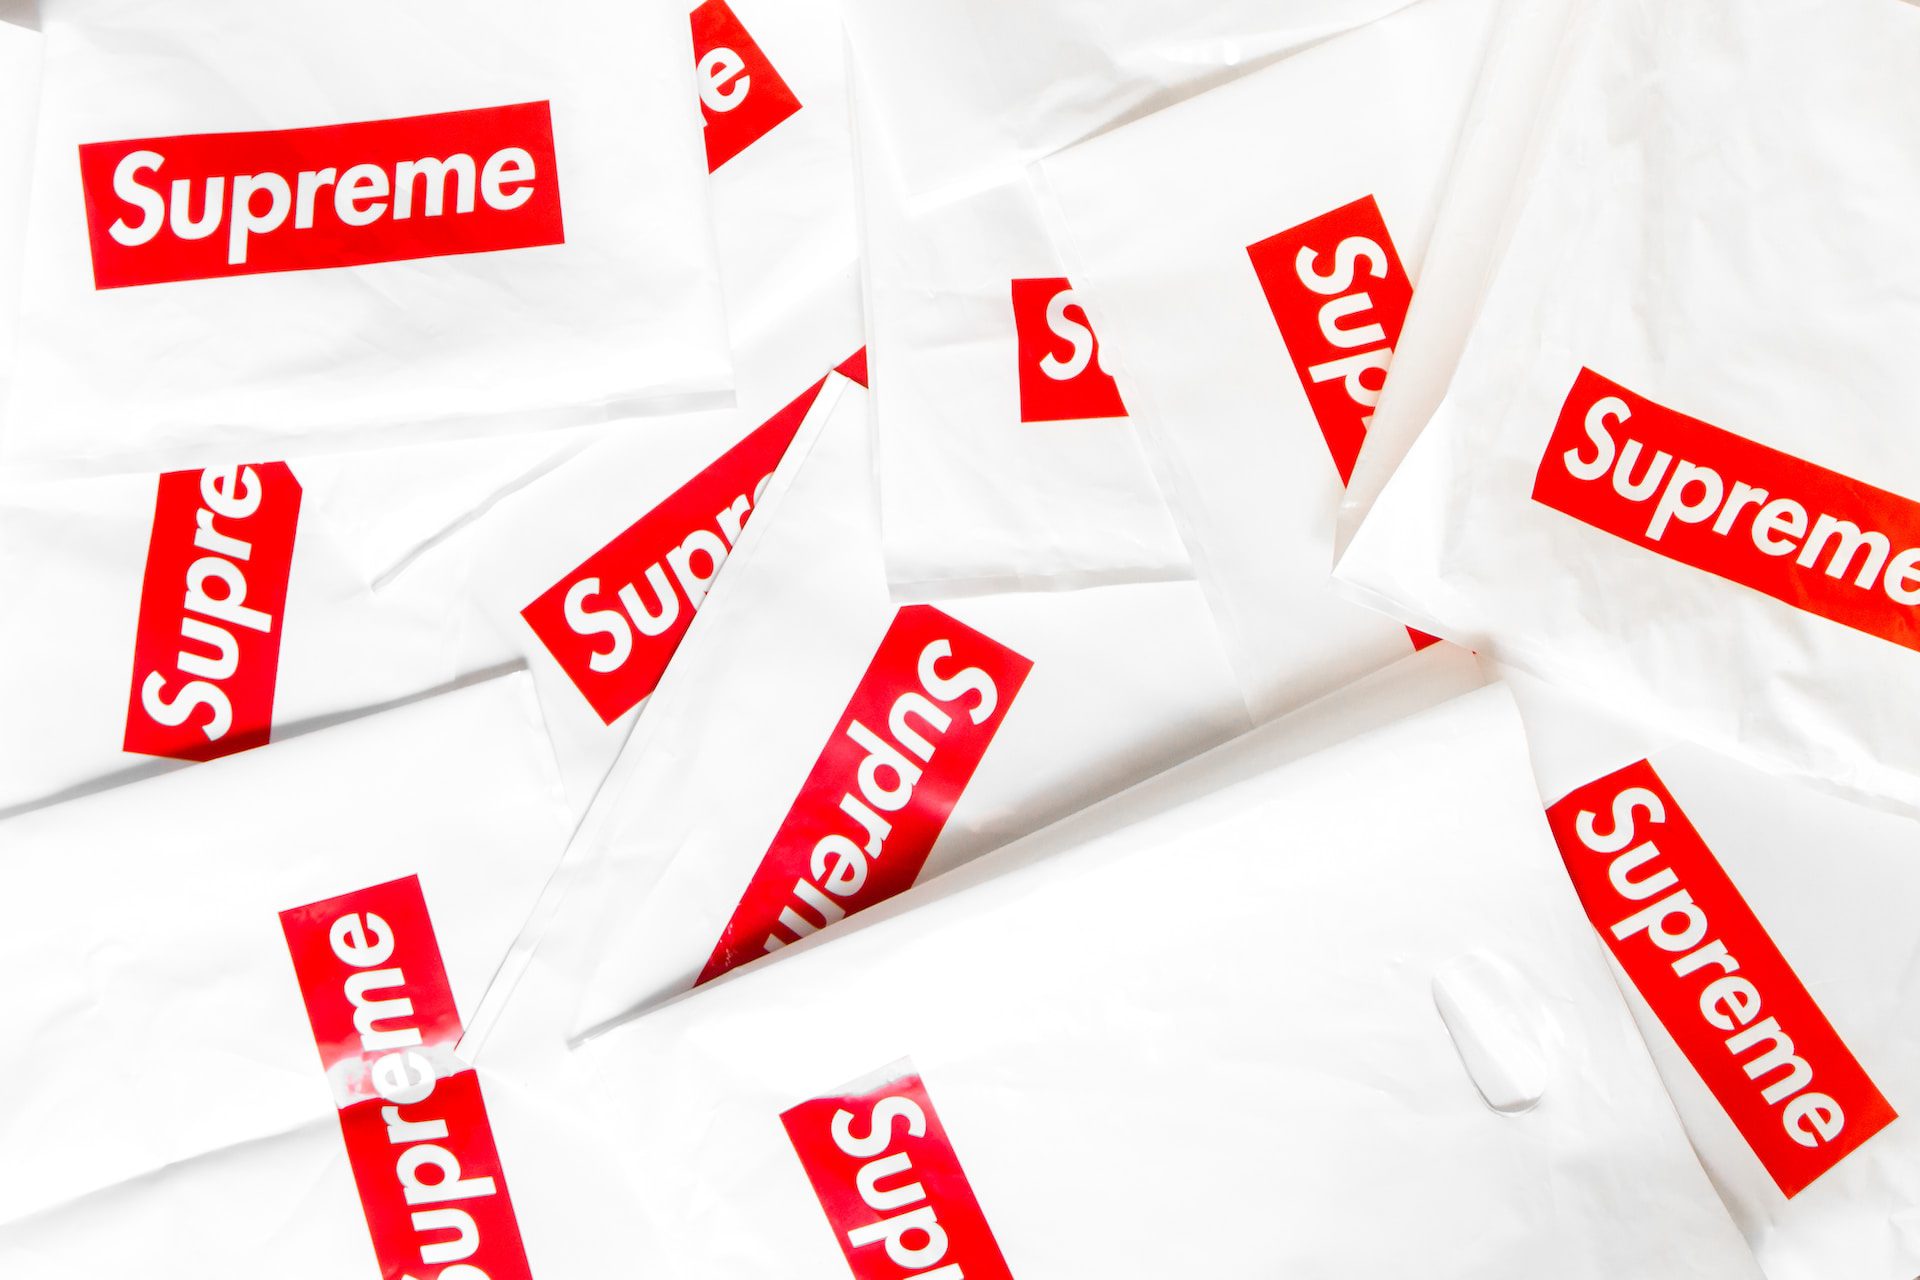 Louis Vuitton x Supreme Collaboration: A Game-Changer in Luxury Streetwear